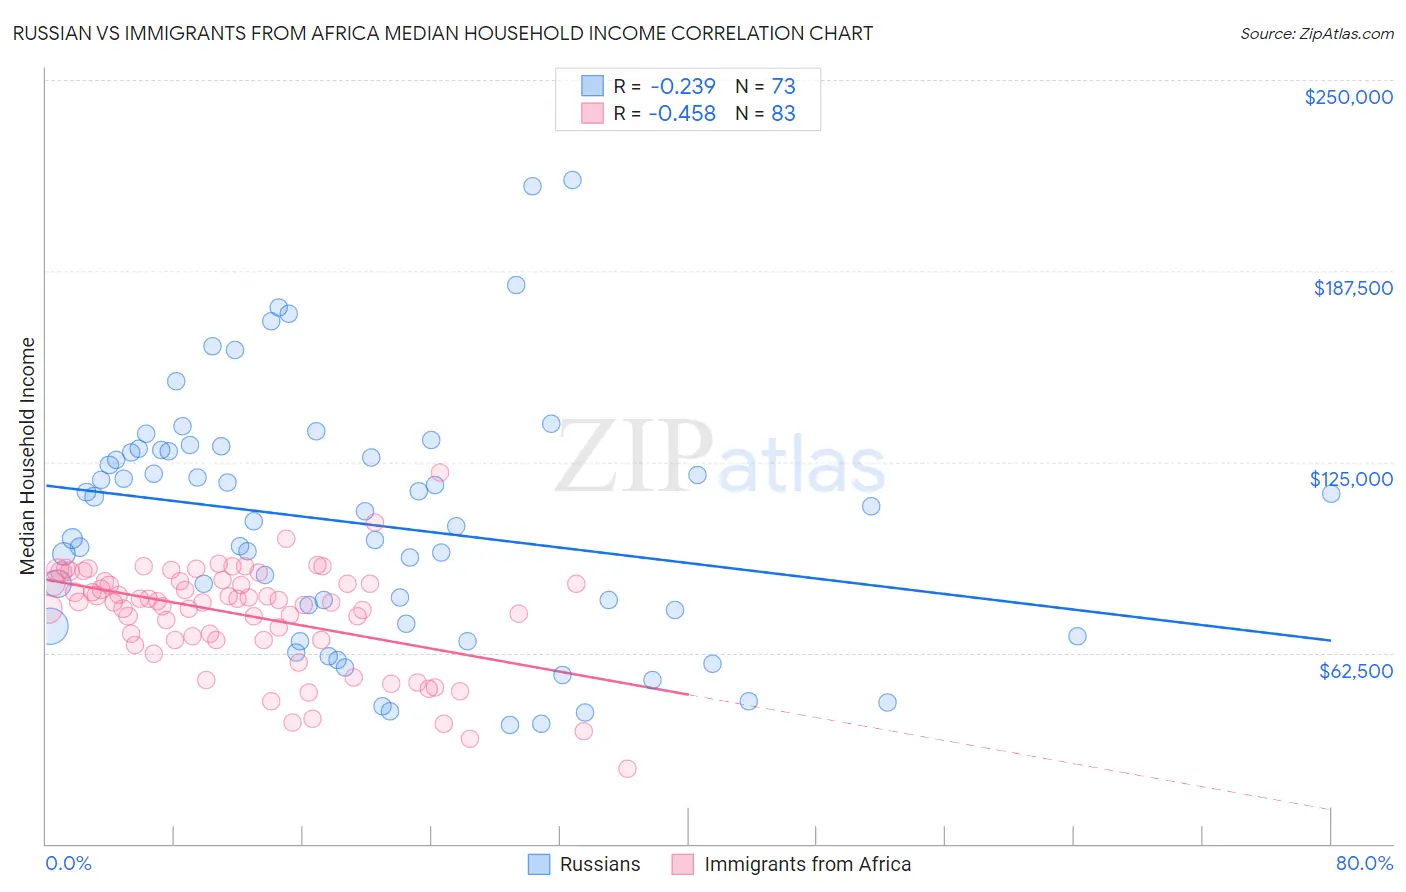 Russian vs Immigrants from Africa Median Household Income